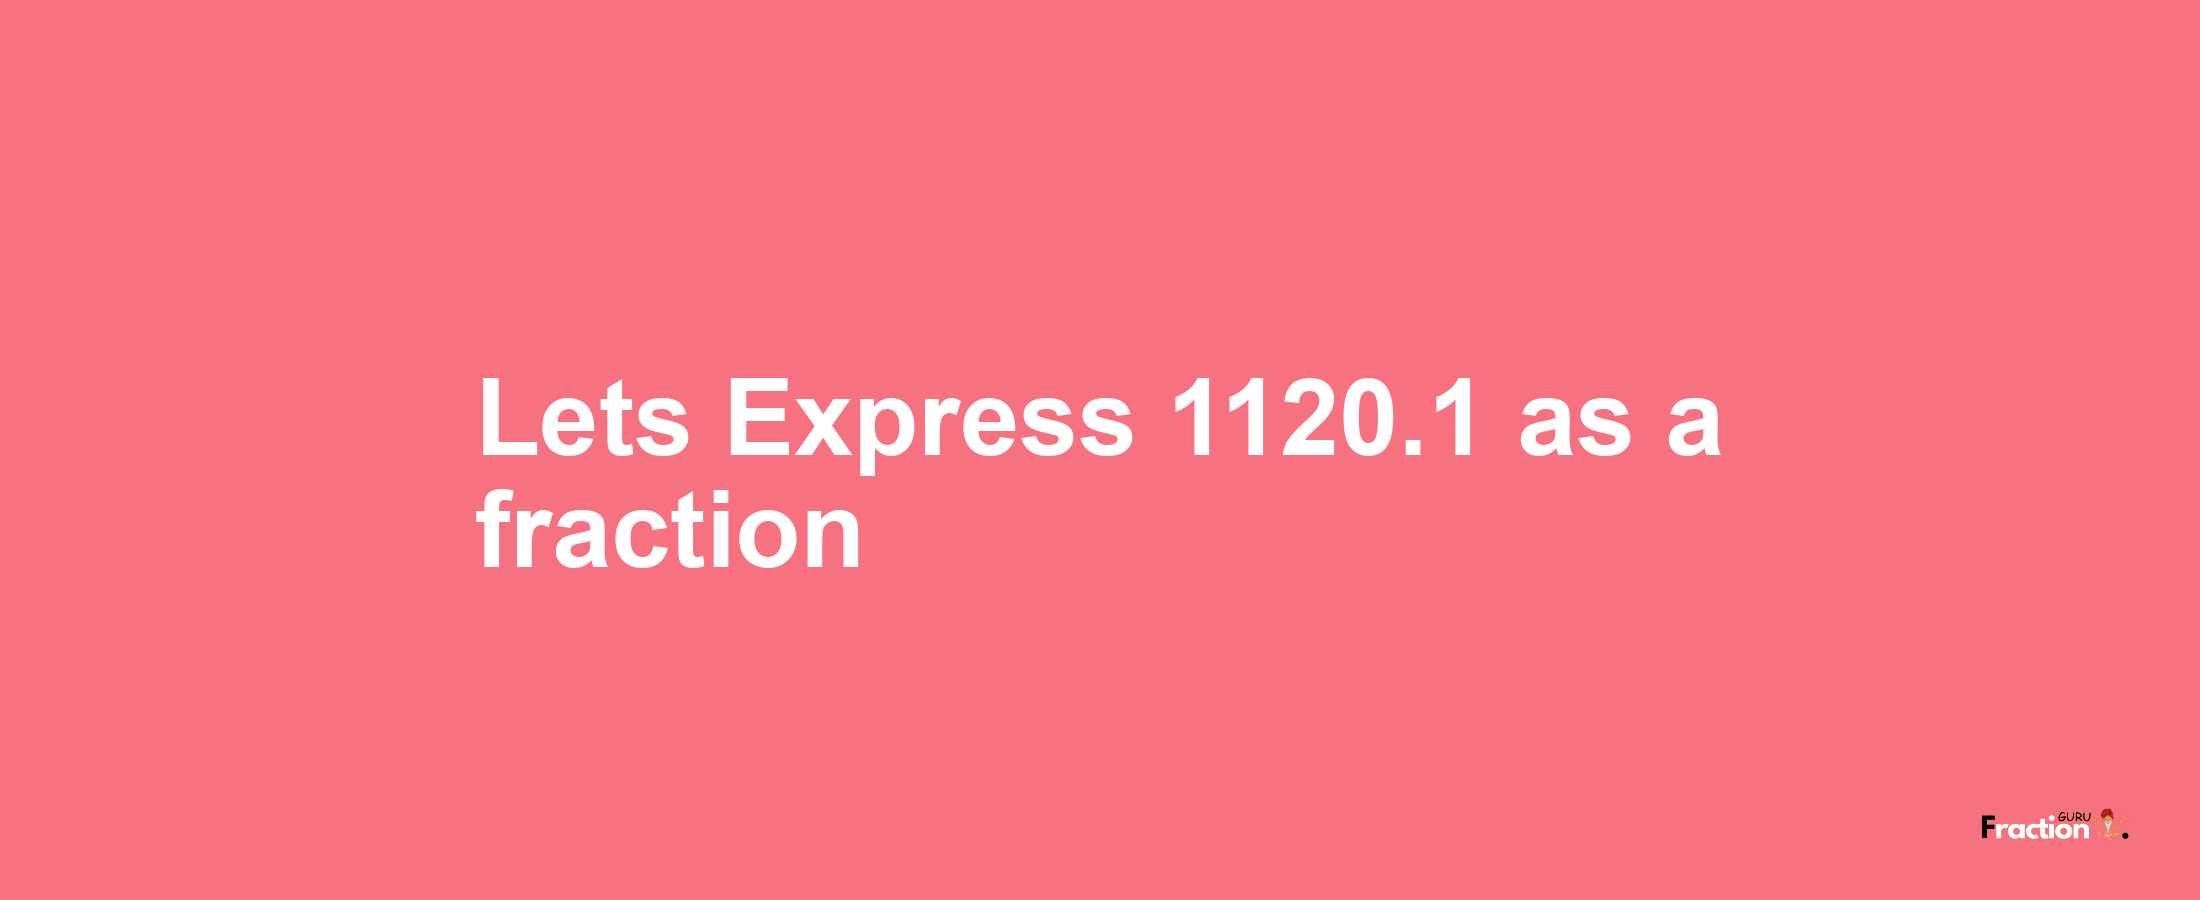 Lets Express 1120.1 as afraction